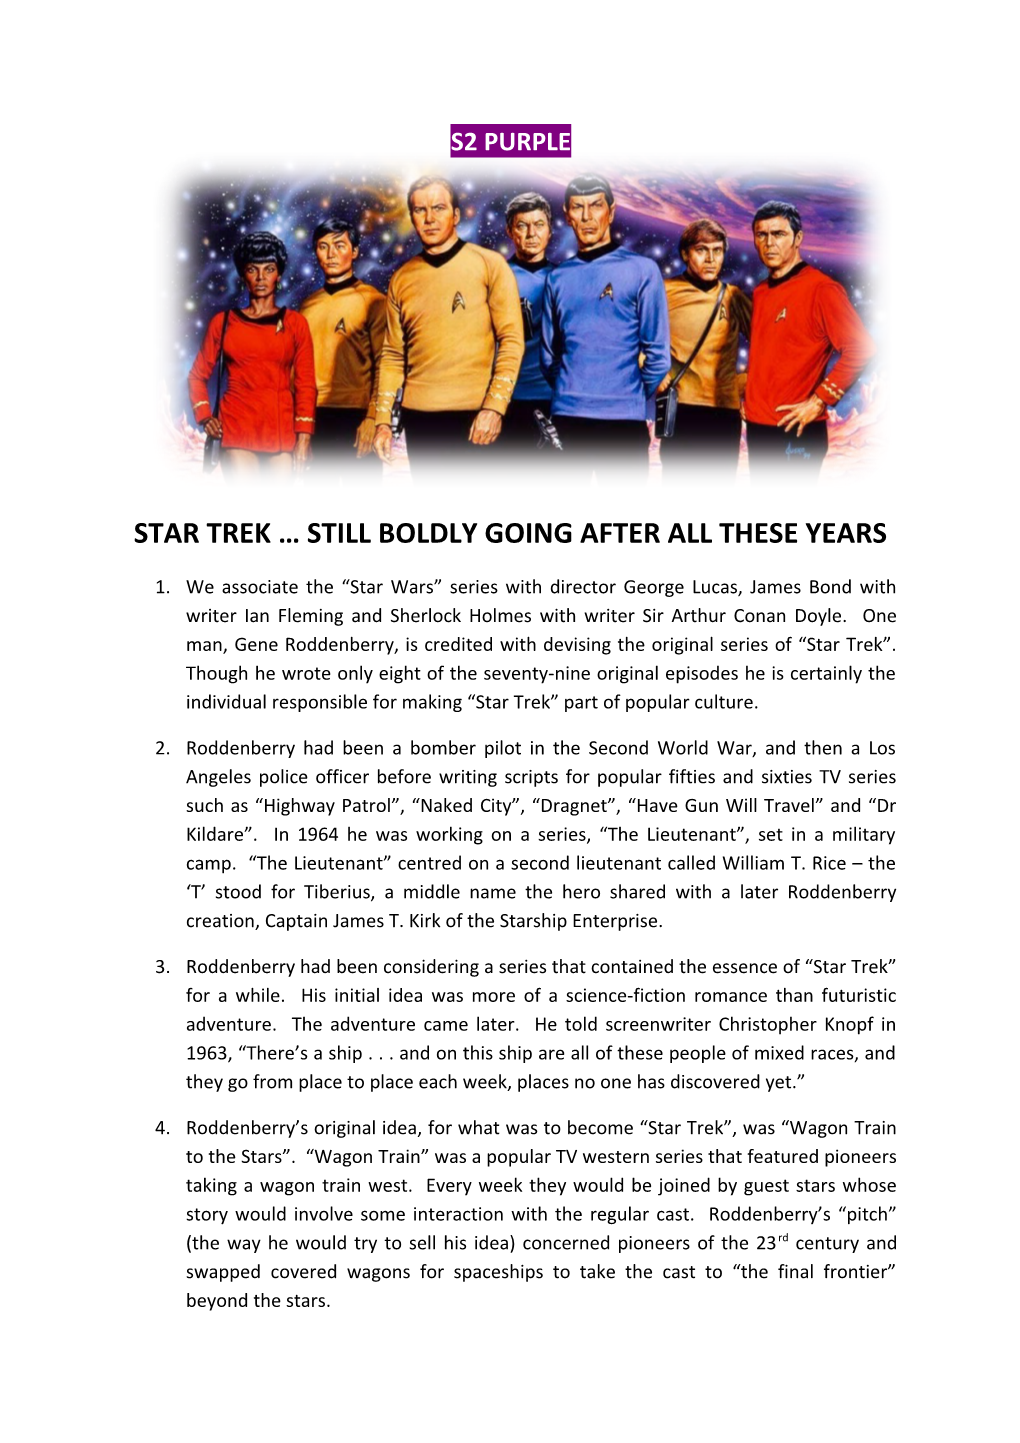 Star Trek Still Boldly Going After All These Years